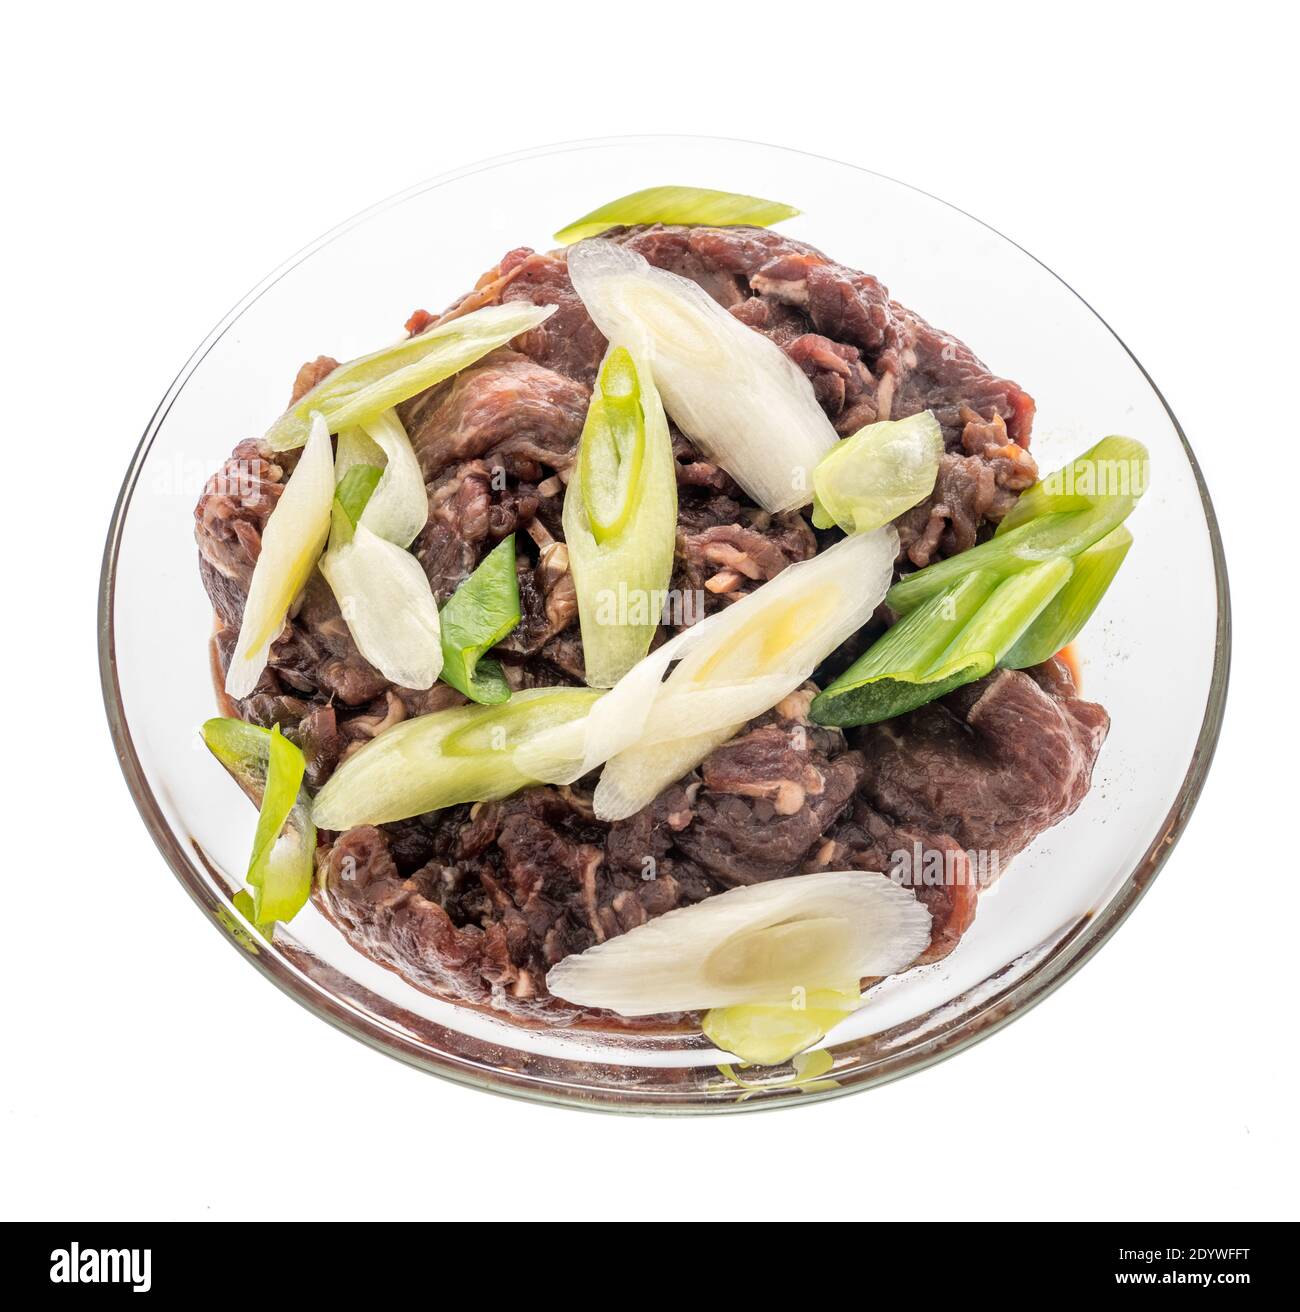 Beef Bulgogi with green onion inside a glass bowl a South Korean meal on an isolated background Stock Photo